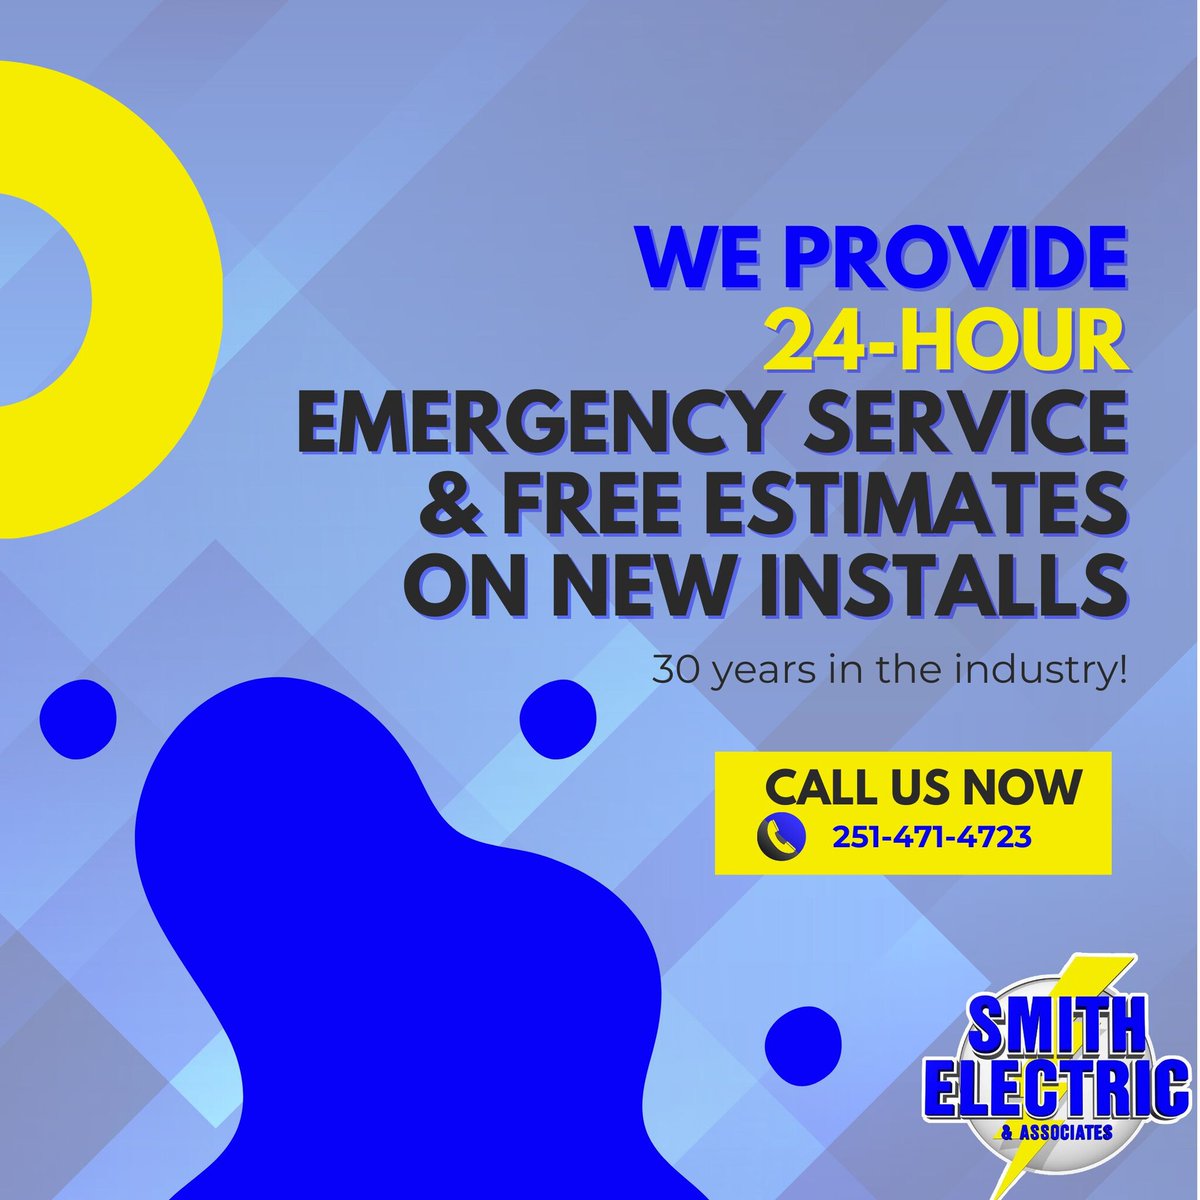 Experience matters! With over 30 years serving the Gulf Coast, Smith Electric offers 24/7 emergency service and free estimates on new installs. Call us for all your electrical needs! #ExperiencedContractor #EmergencyService